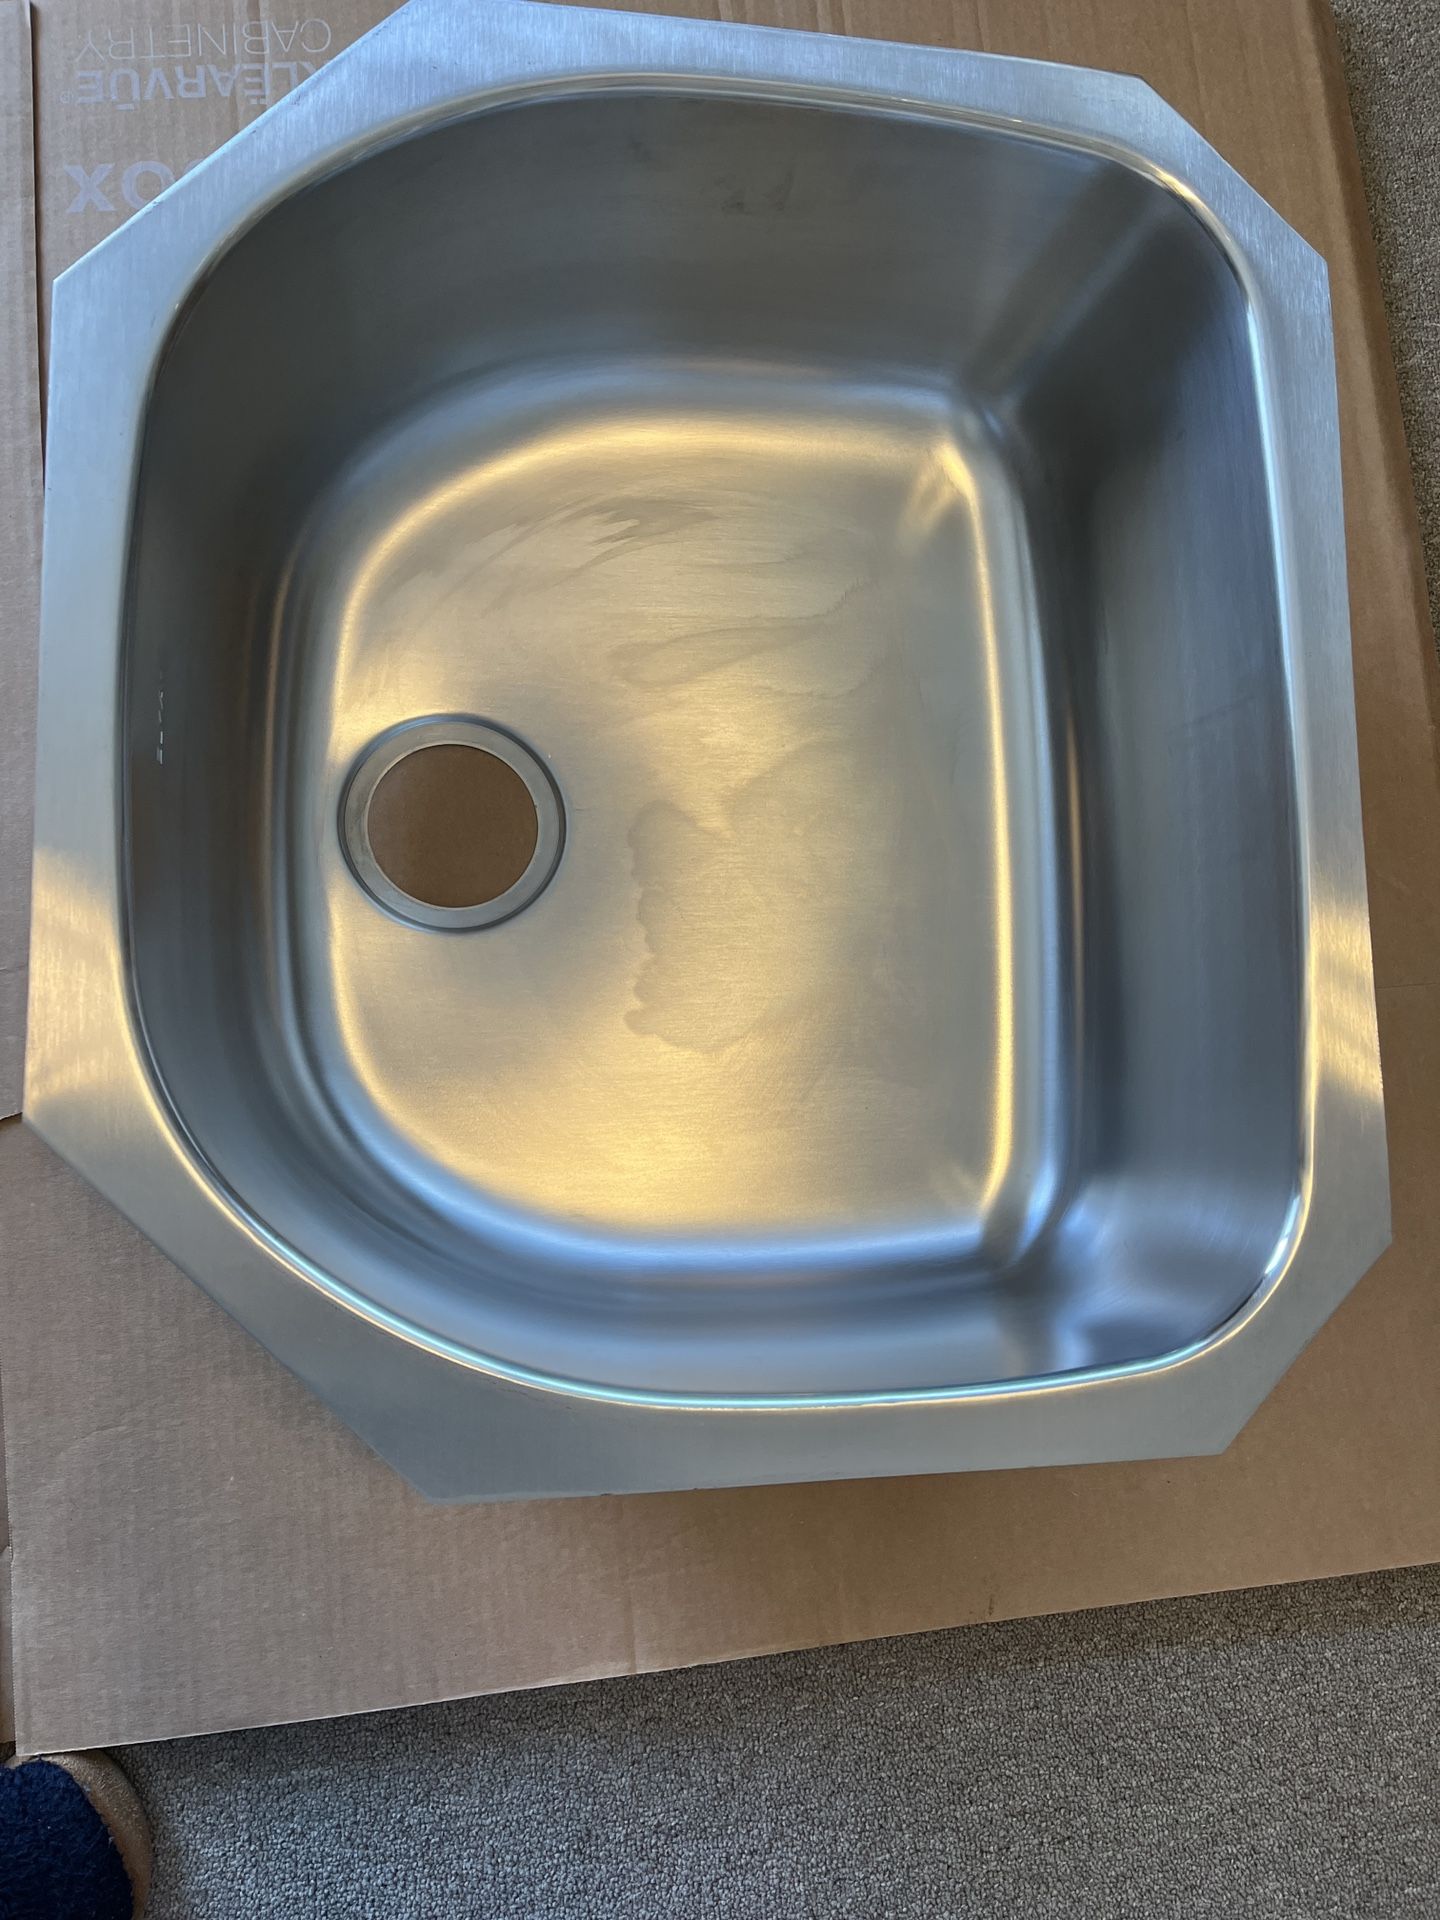 Stainless steel Sink - New 